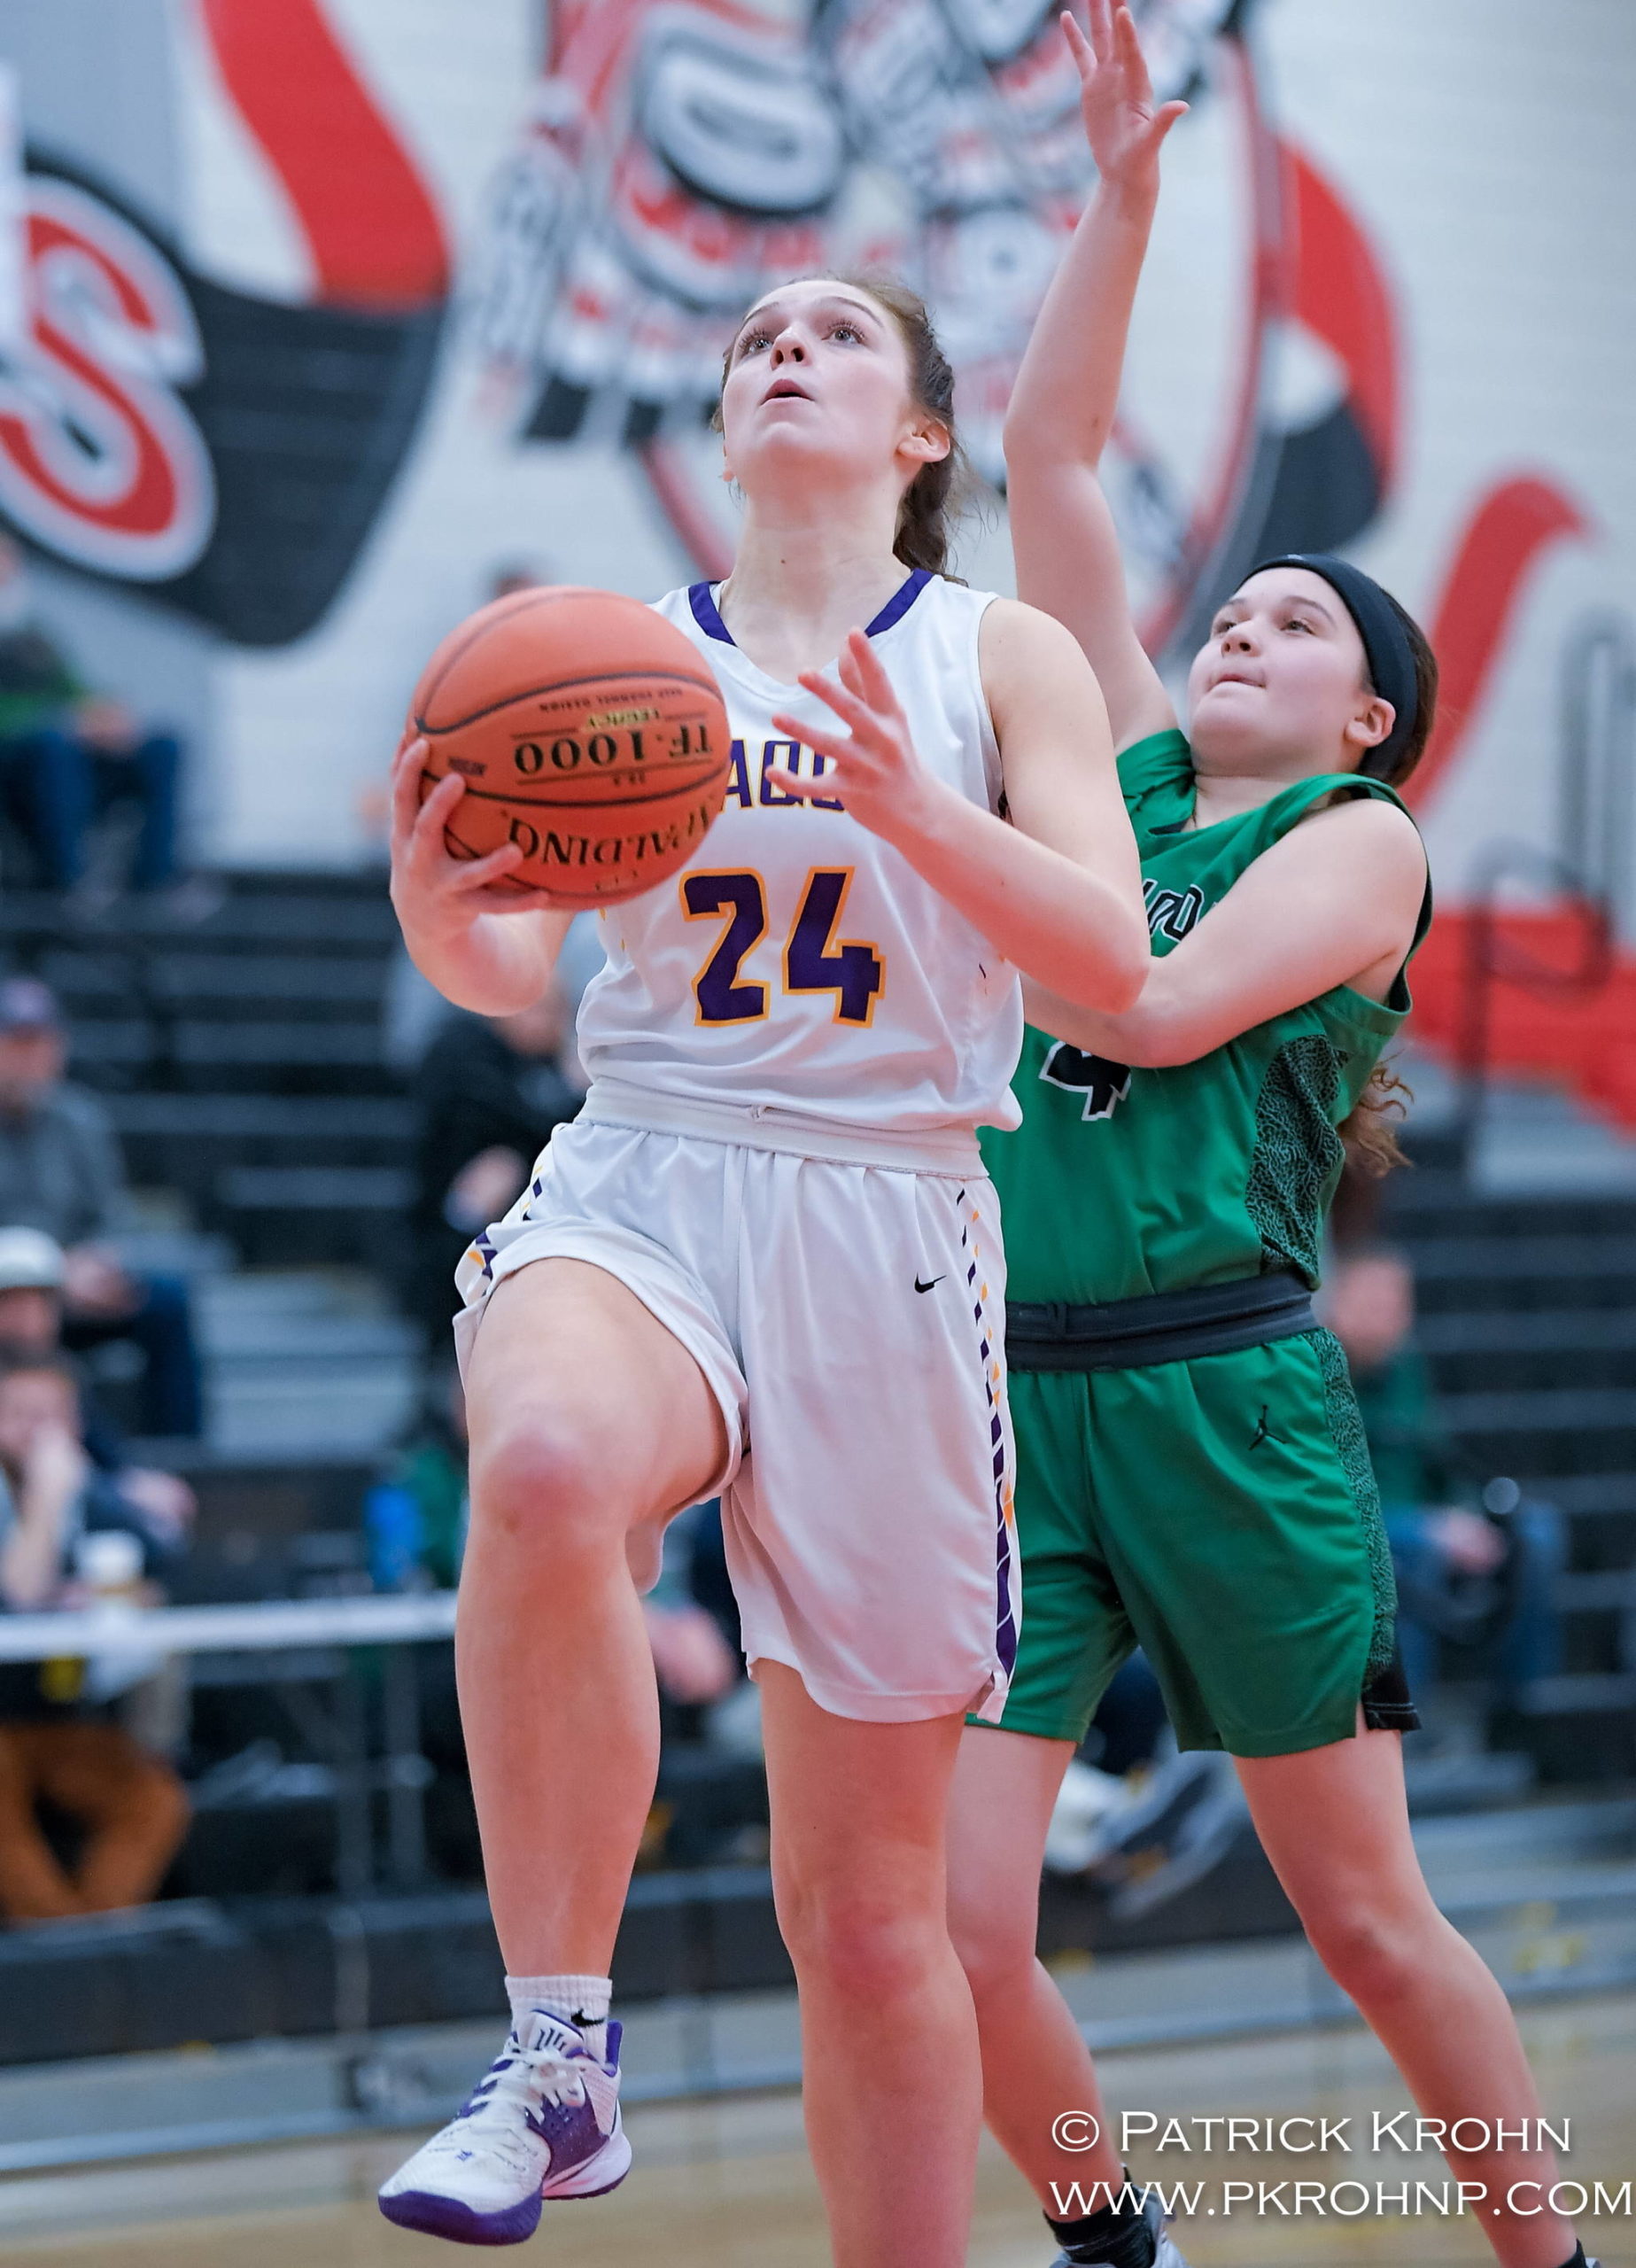 Issaquah’s Alivia Stephens scored a game-high 17 points for Eagles during their regional playoff game against Kentwood on Feb. 29 at Sammamish High School. Photo courtesy of Patrick Krohn/Patrick Krohn Photography